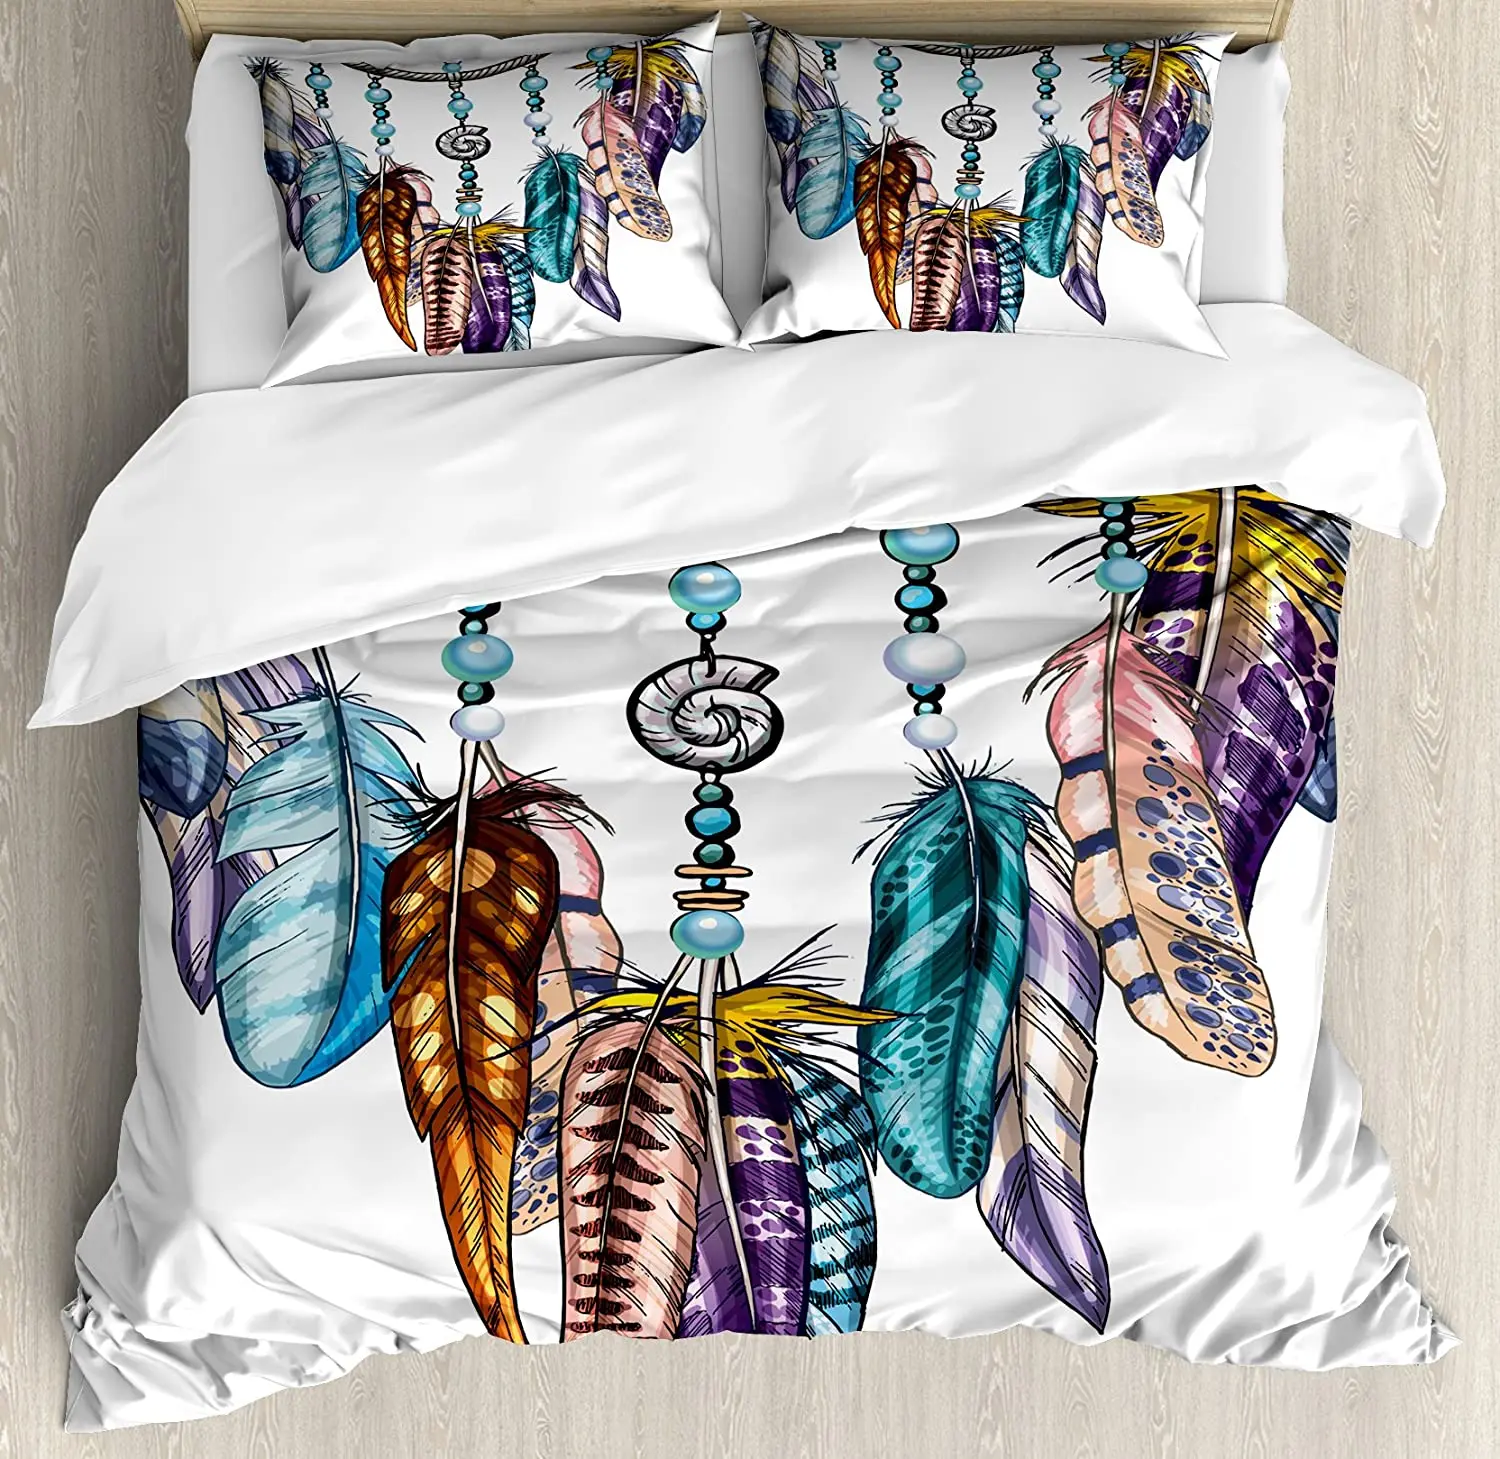 

Feather Bedding Set Ornate Dreamcatcher with Feathers and G 3pcs Duvet Cover Set Bed Set Quilt Cover Pillow Case Comforter Cover